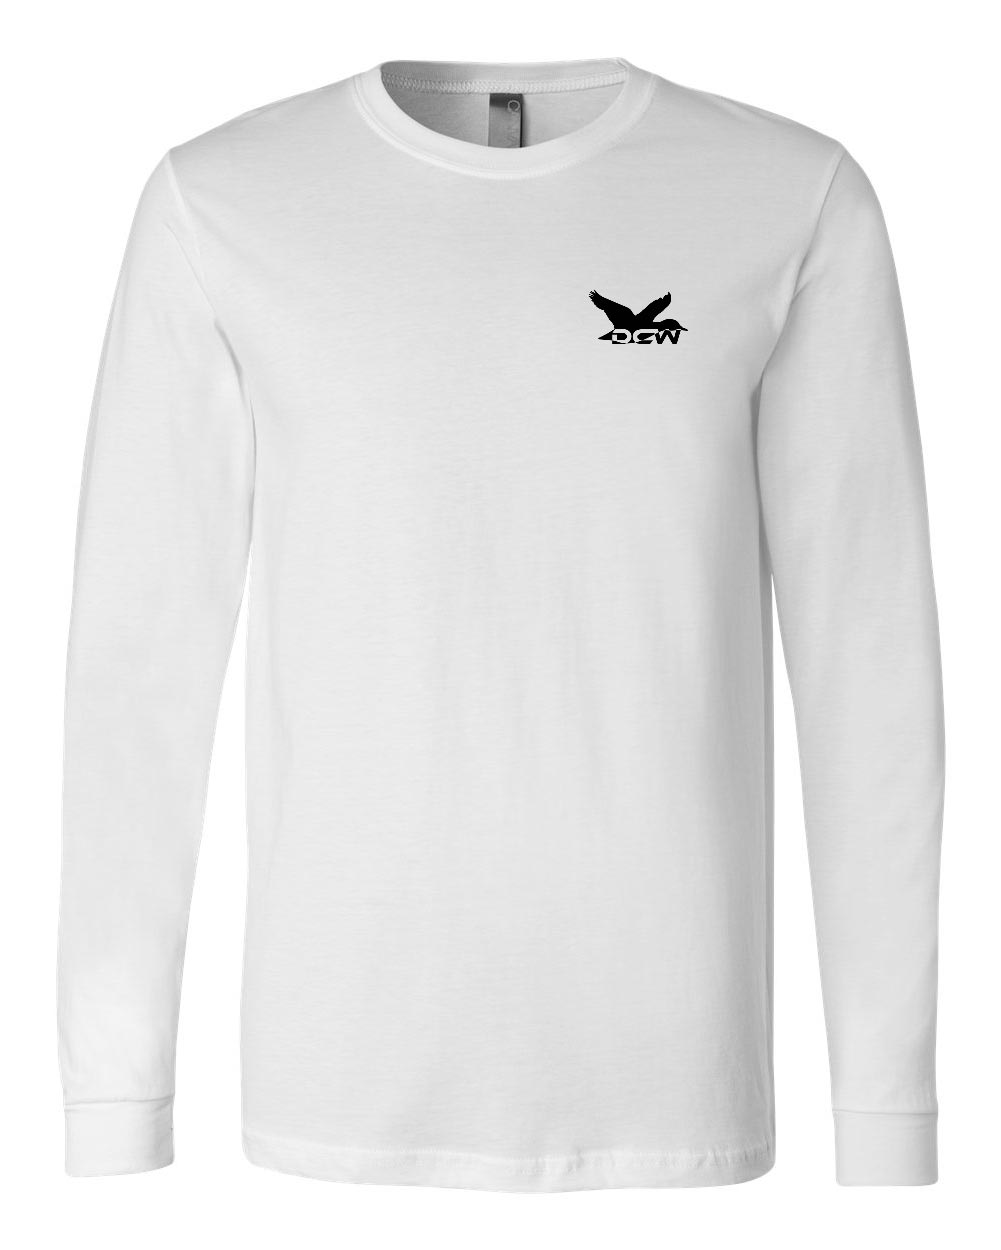 Green Wing Express - White Long Sleeve